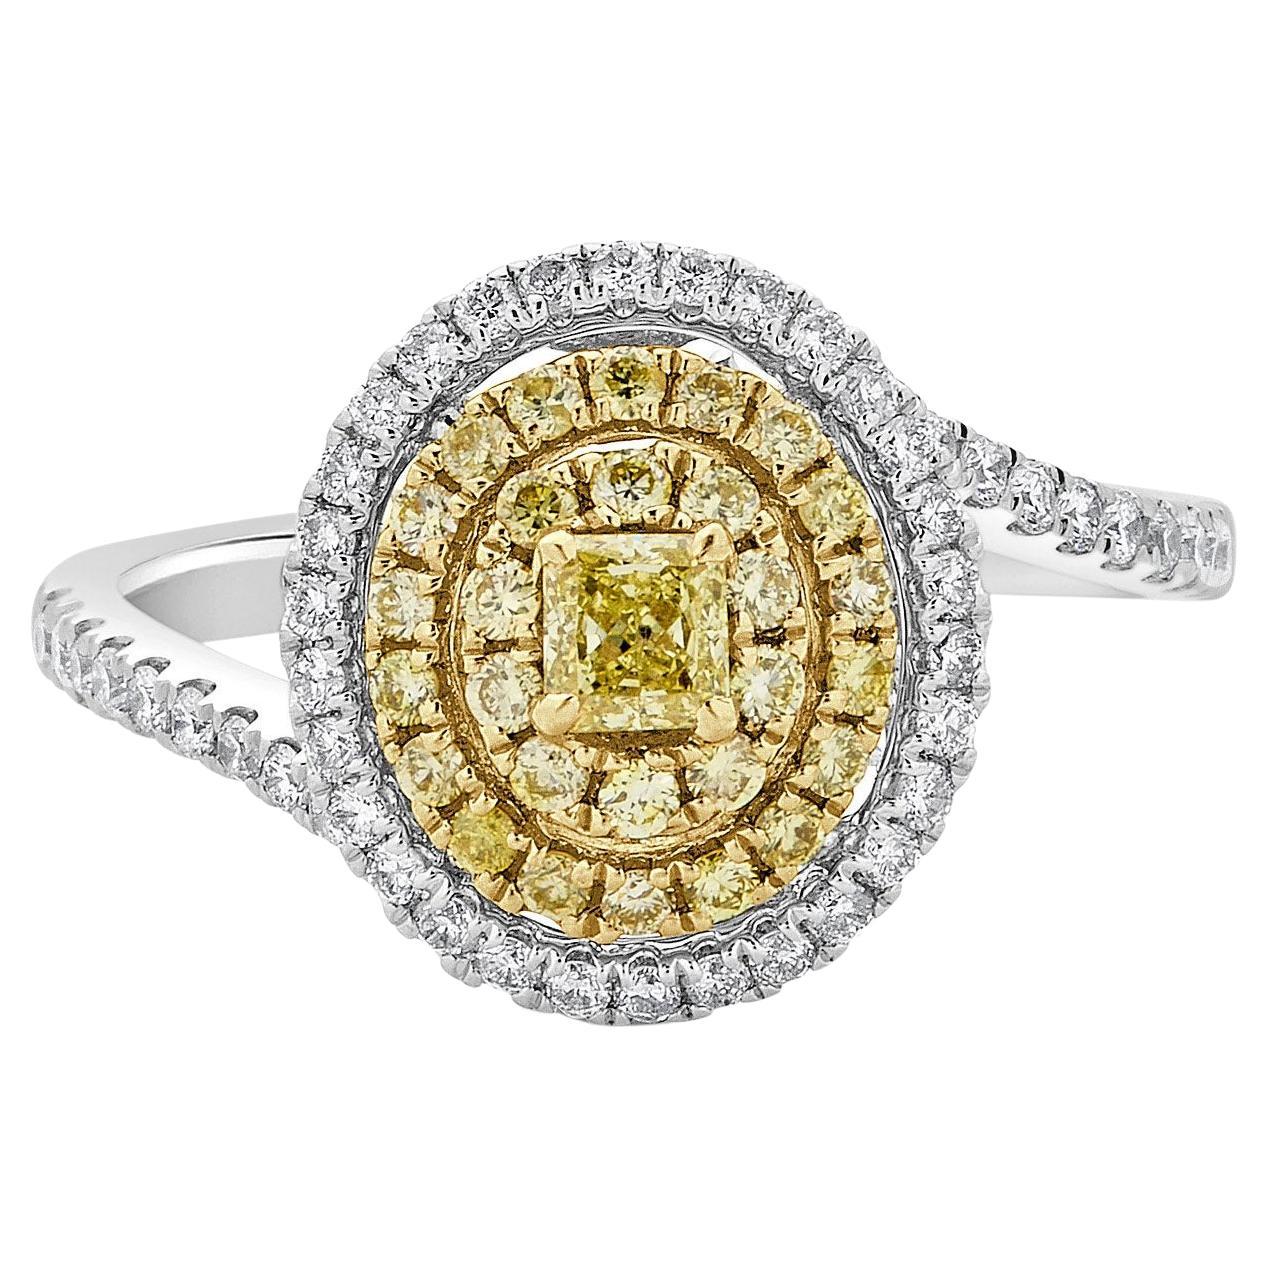 0.20ct Yellow Diamond Ring with 0.59Tct Diamonds Set in 18k Two Tone Gold